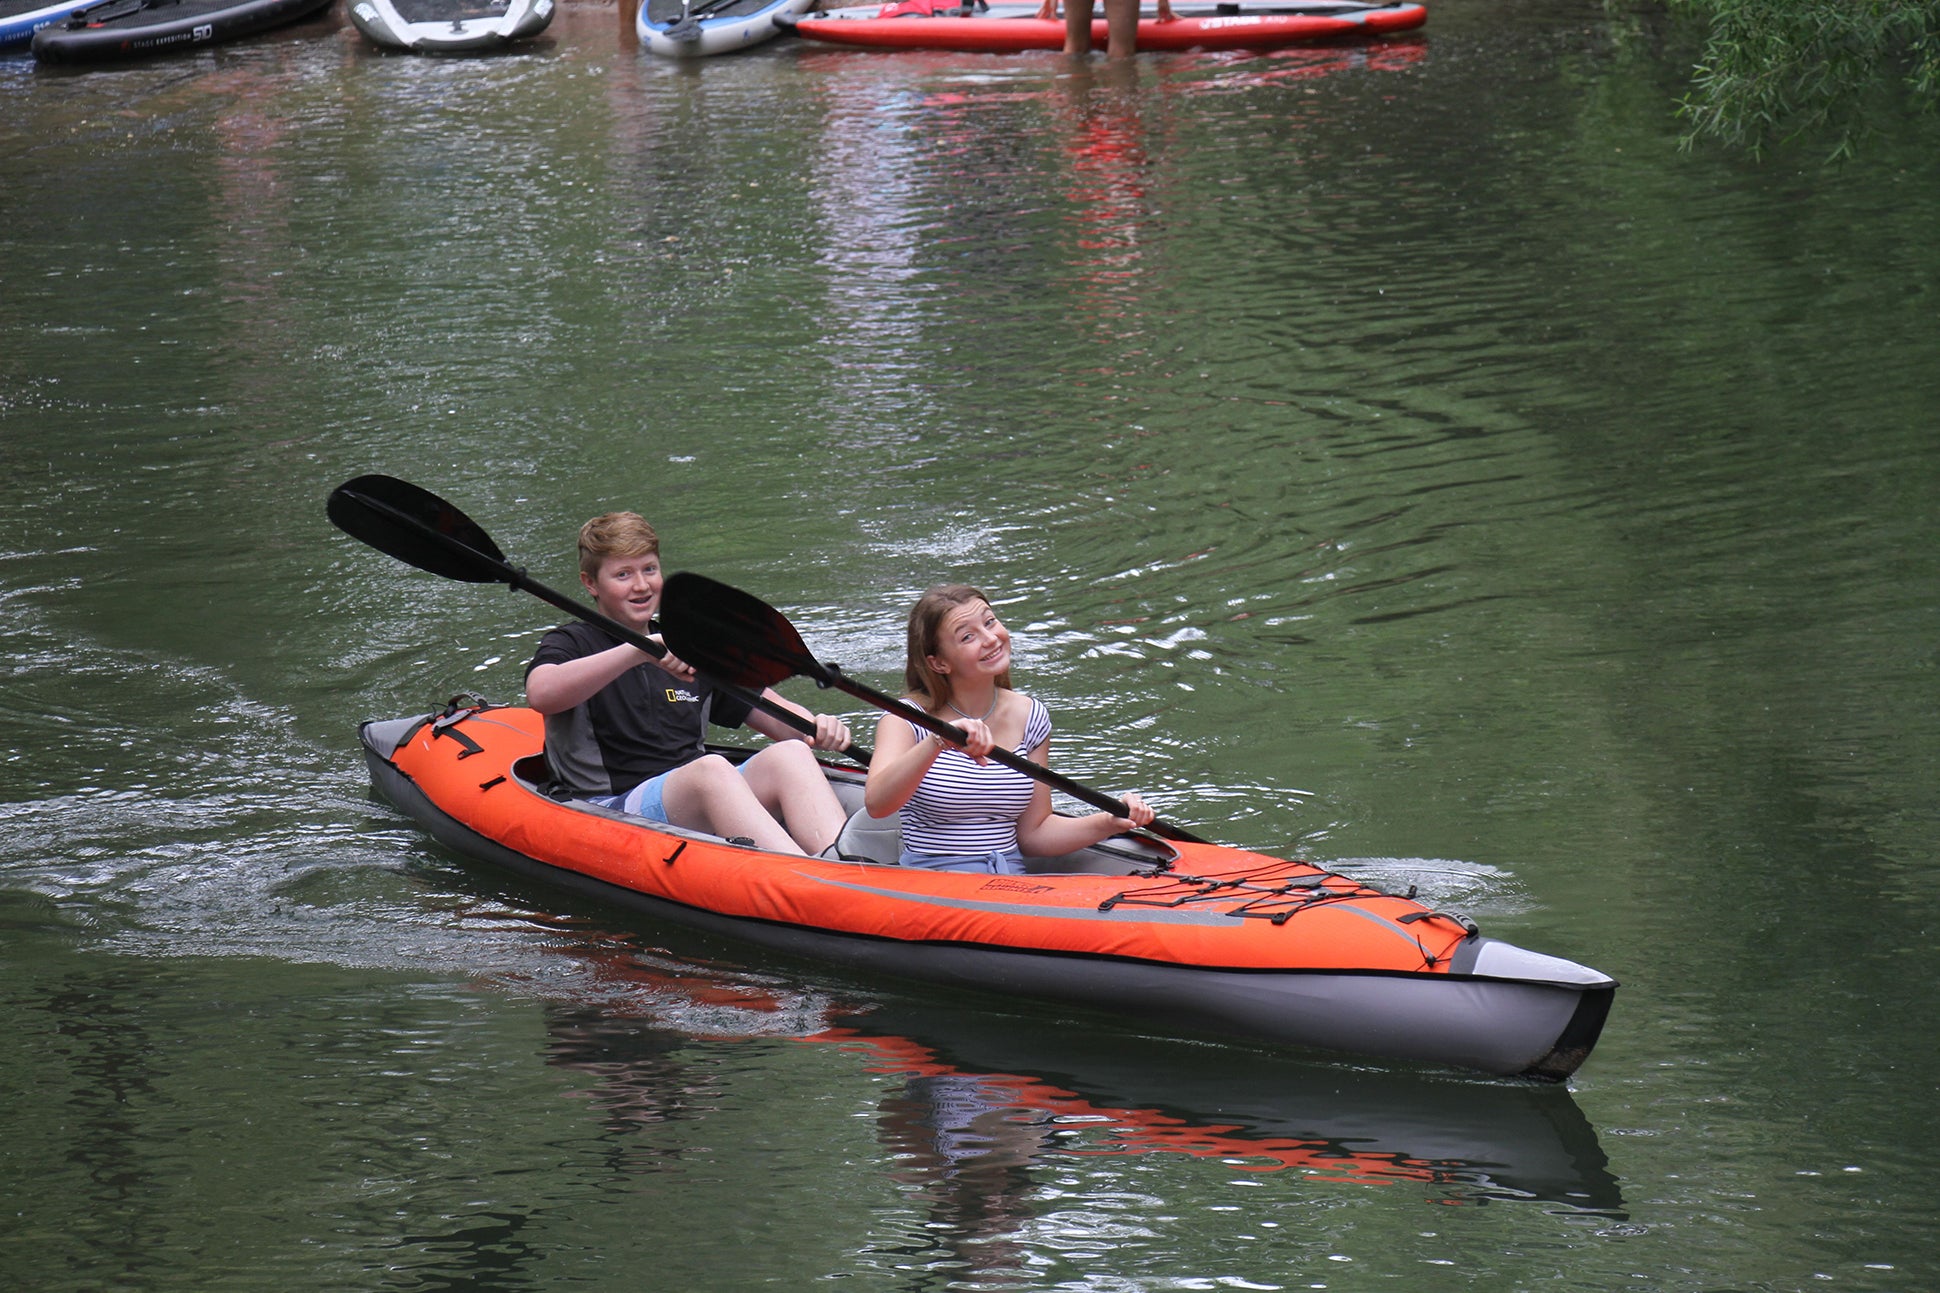 Two children kayaking with the STAGE 2-Piece Kayak Paddle and an Advanced Elements Inflatable Kayak